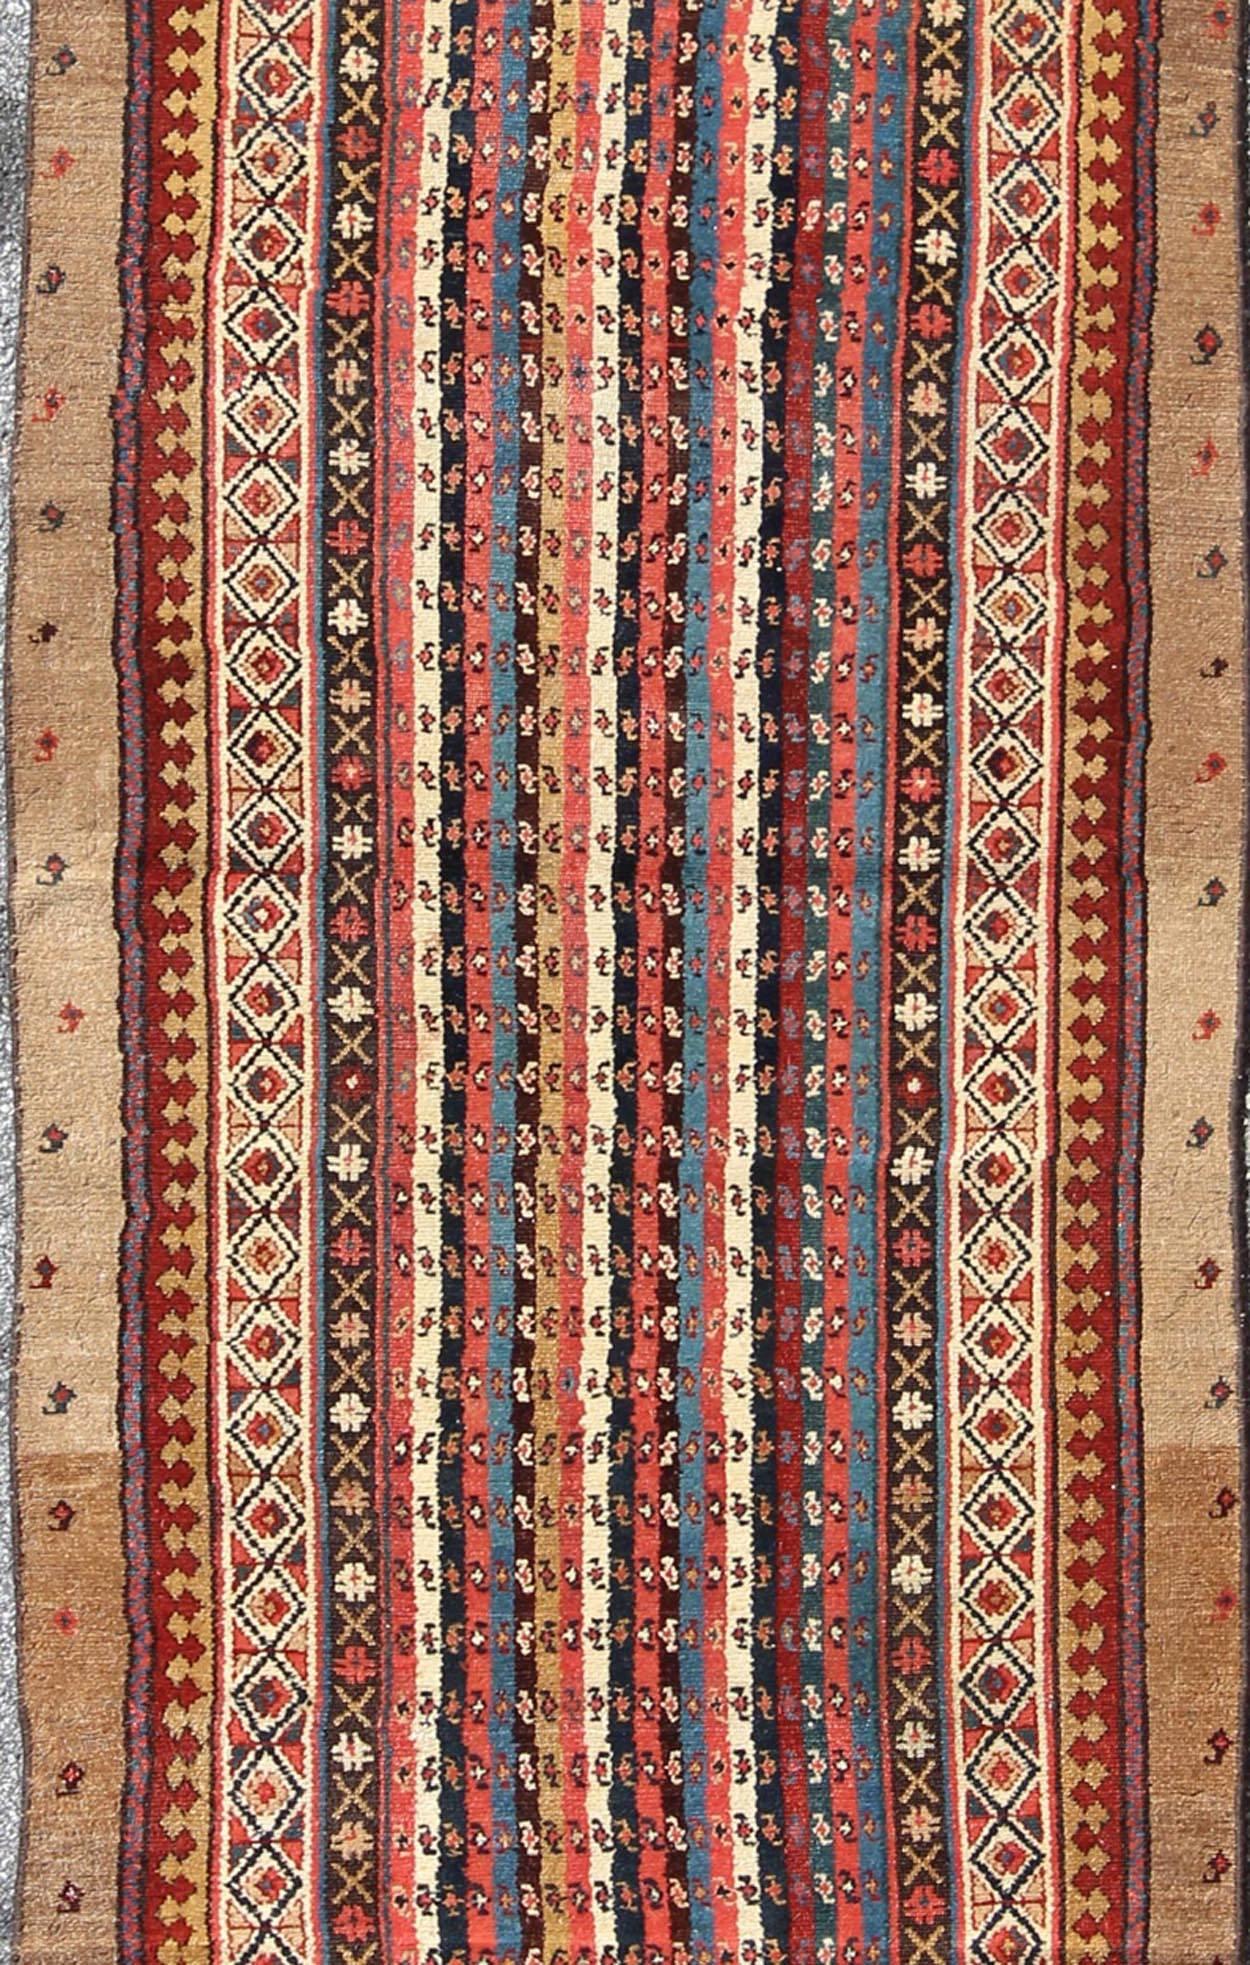 Tribal Uniquely Designed Antique Persian Camel Hair Serab Runner with Vertical Stripes